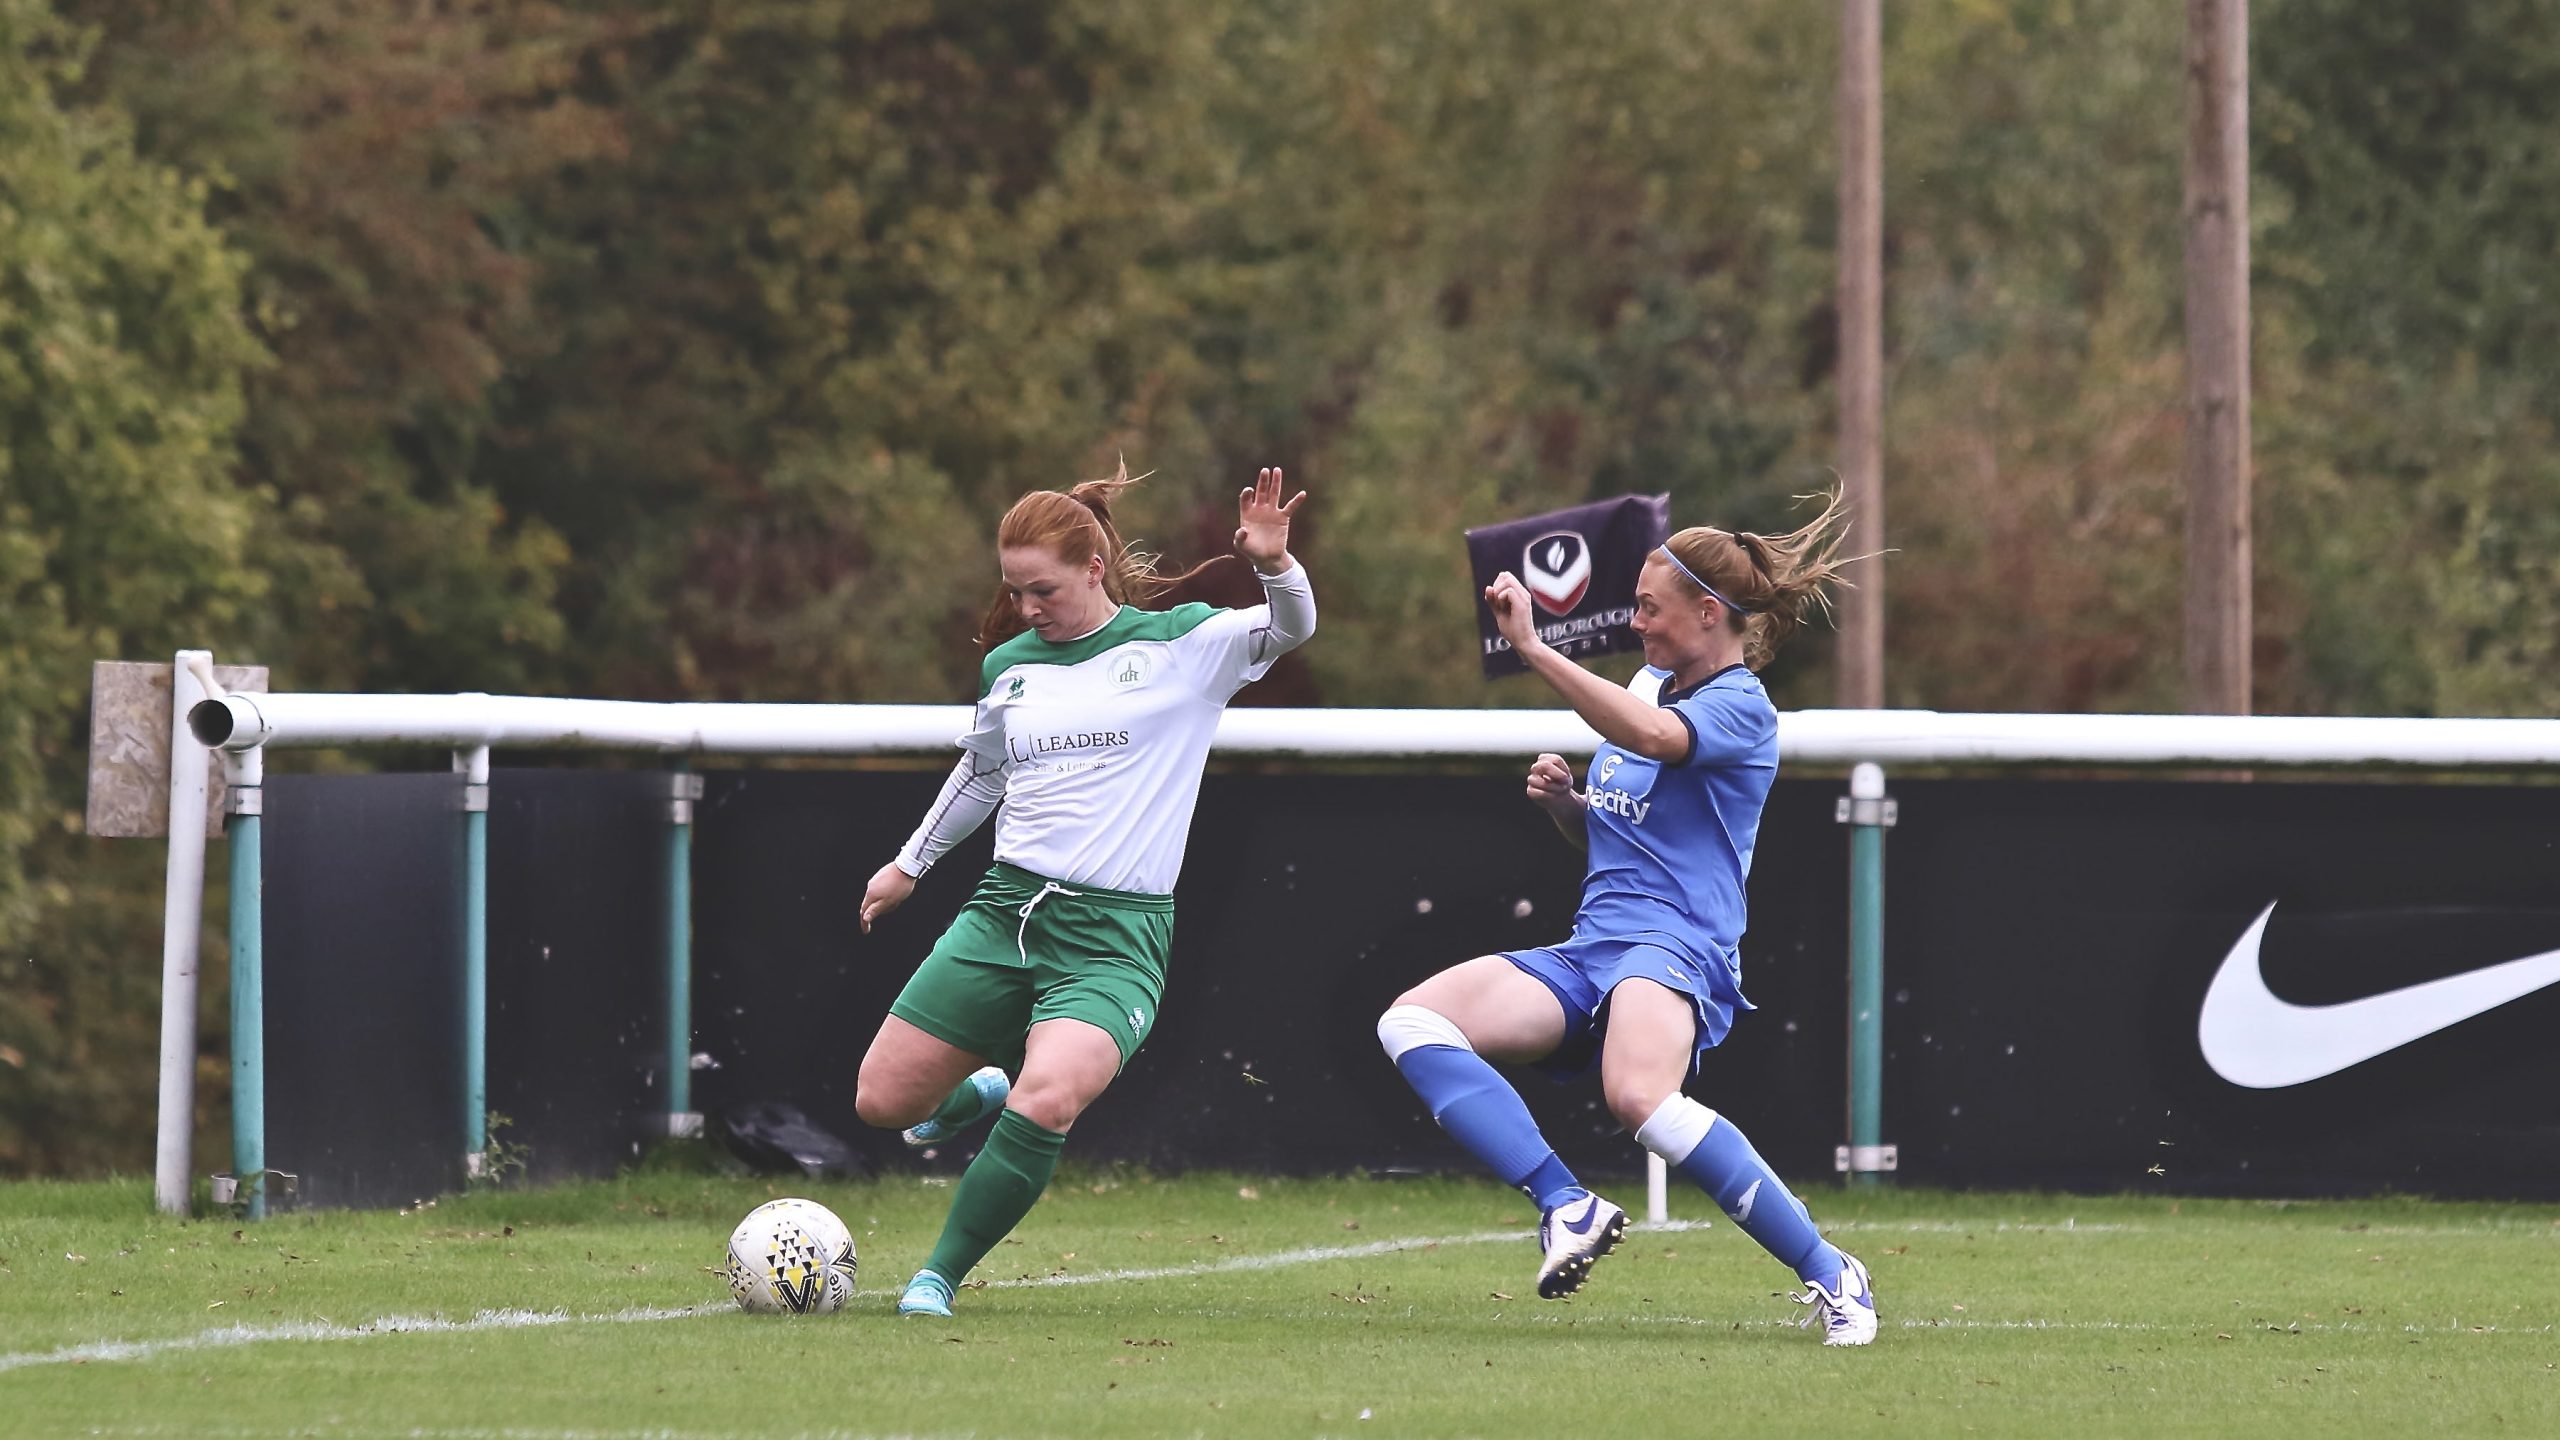 Jade Widdow puts on a cross as the Loughborough player goes in to block it.